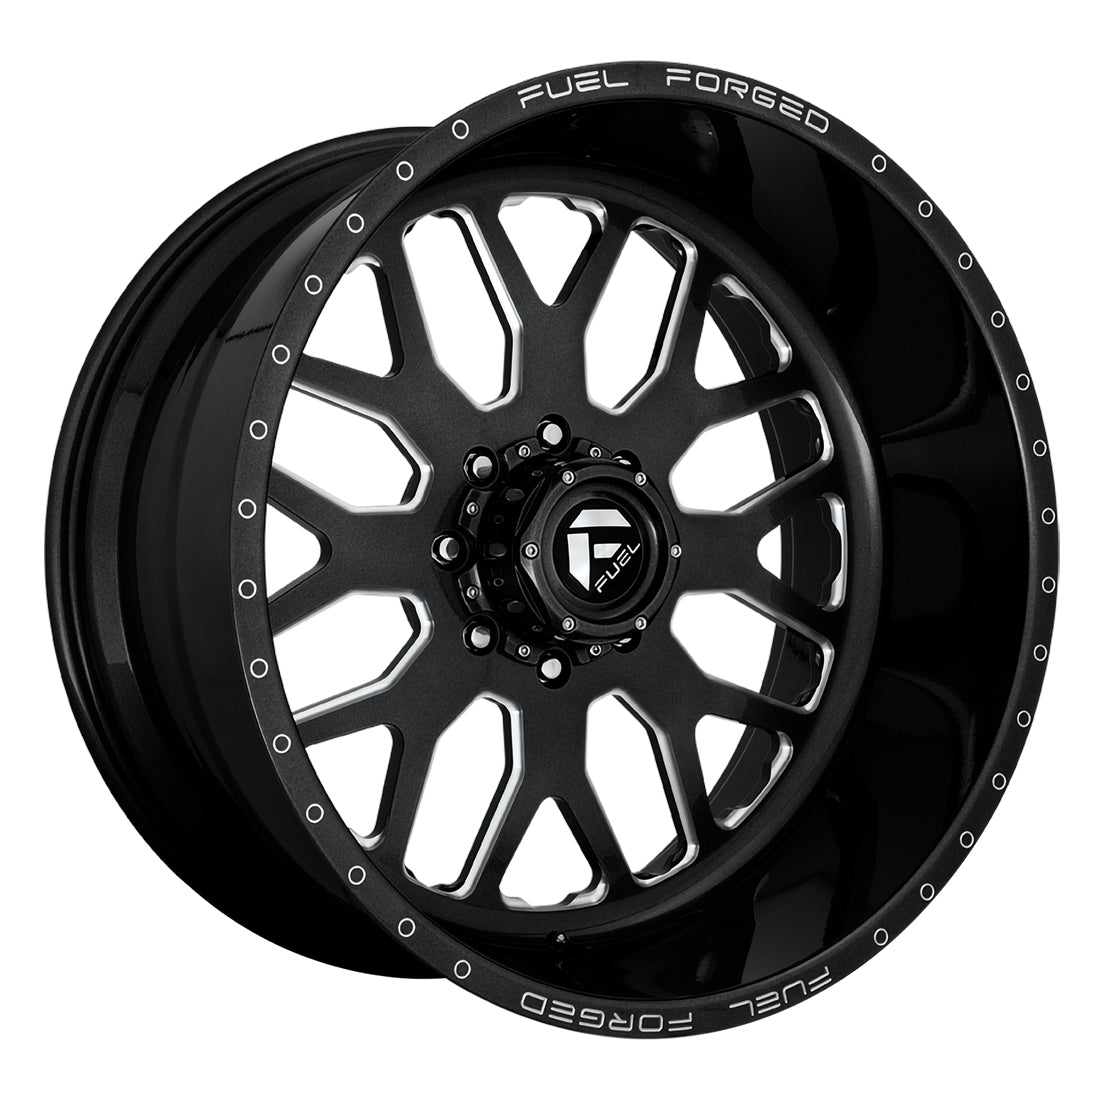 FF19D Gloss Black Milled Super Single Open Country R/T 37X12.50R22 (36.8 x 125)